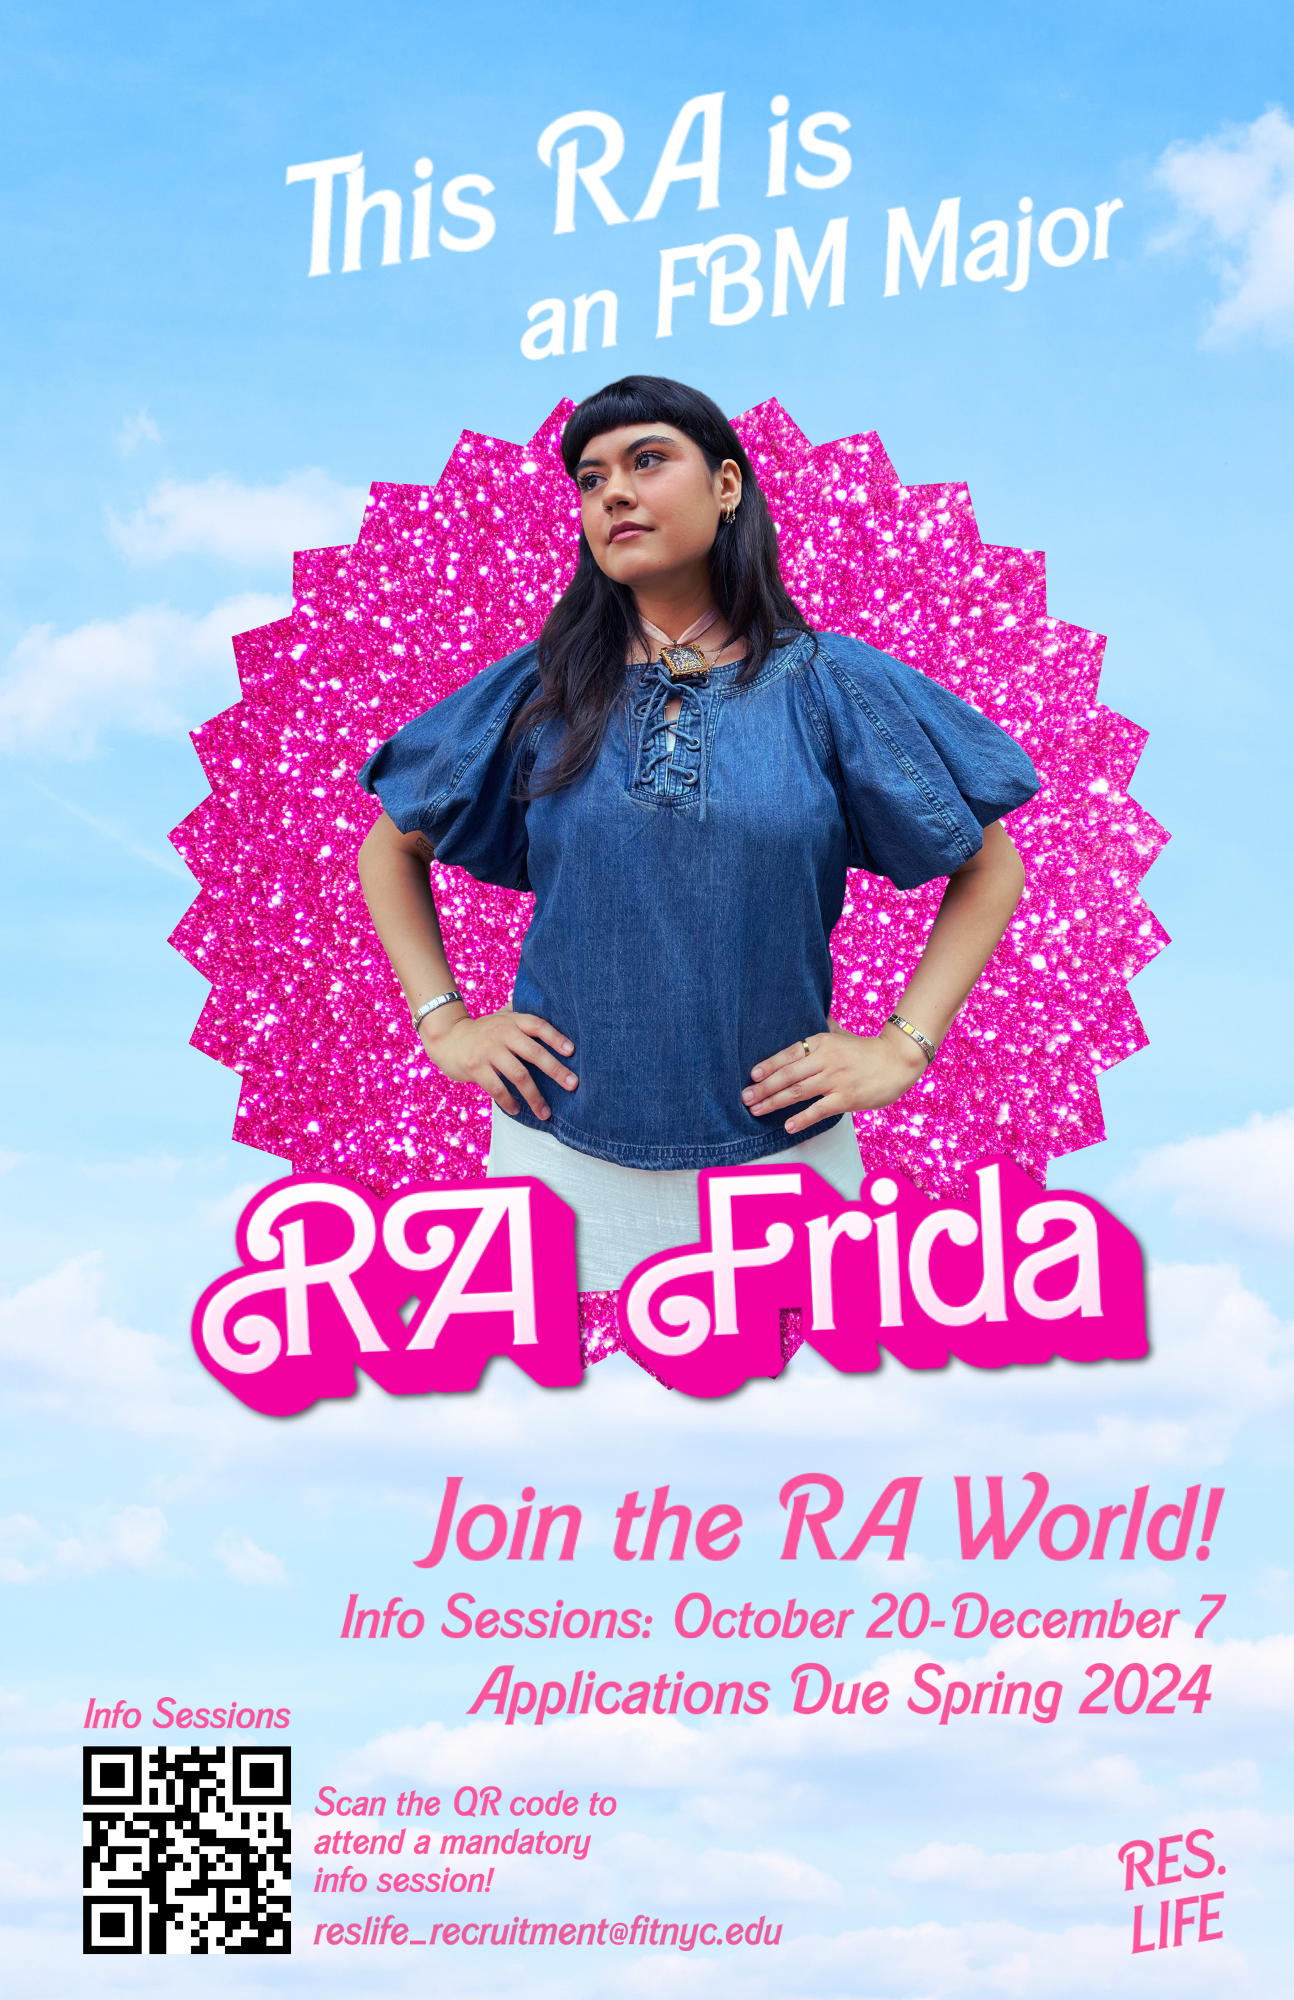 Join the RA World Flyer with an RA in a Pink and Blue Background